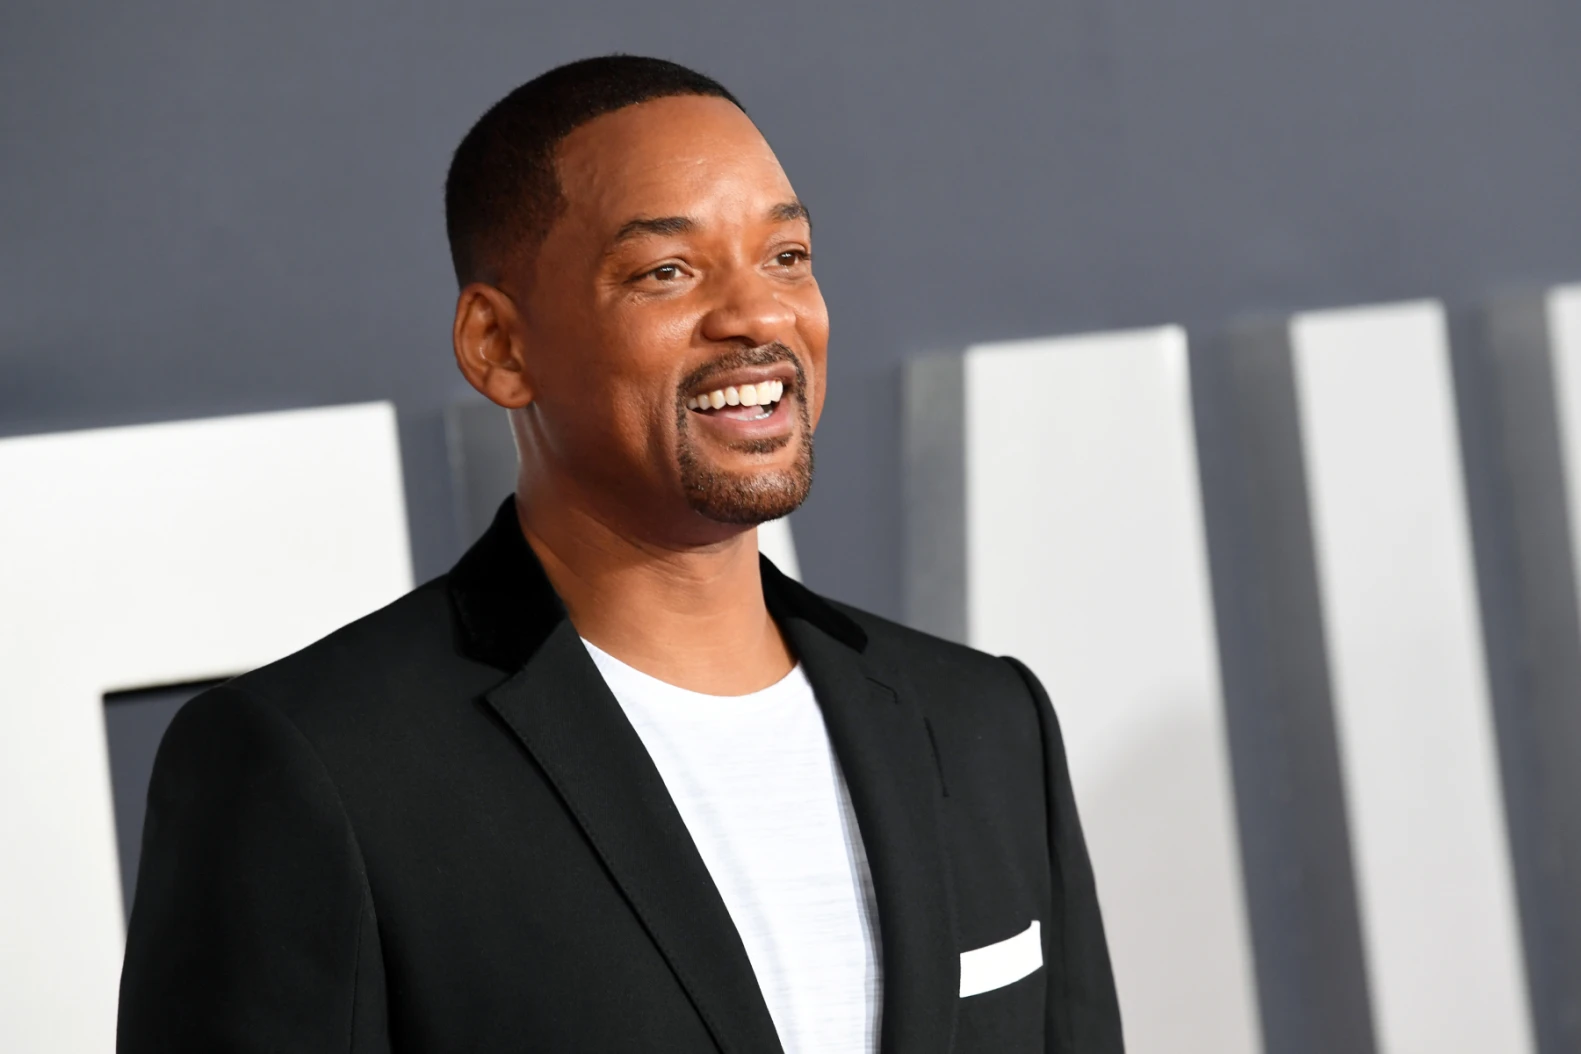 Will Smith has had a successful acting career